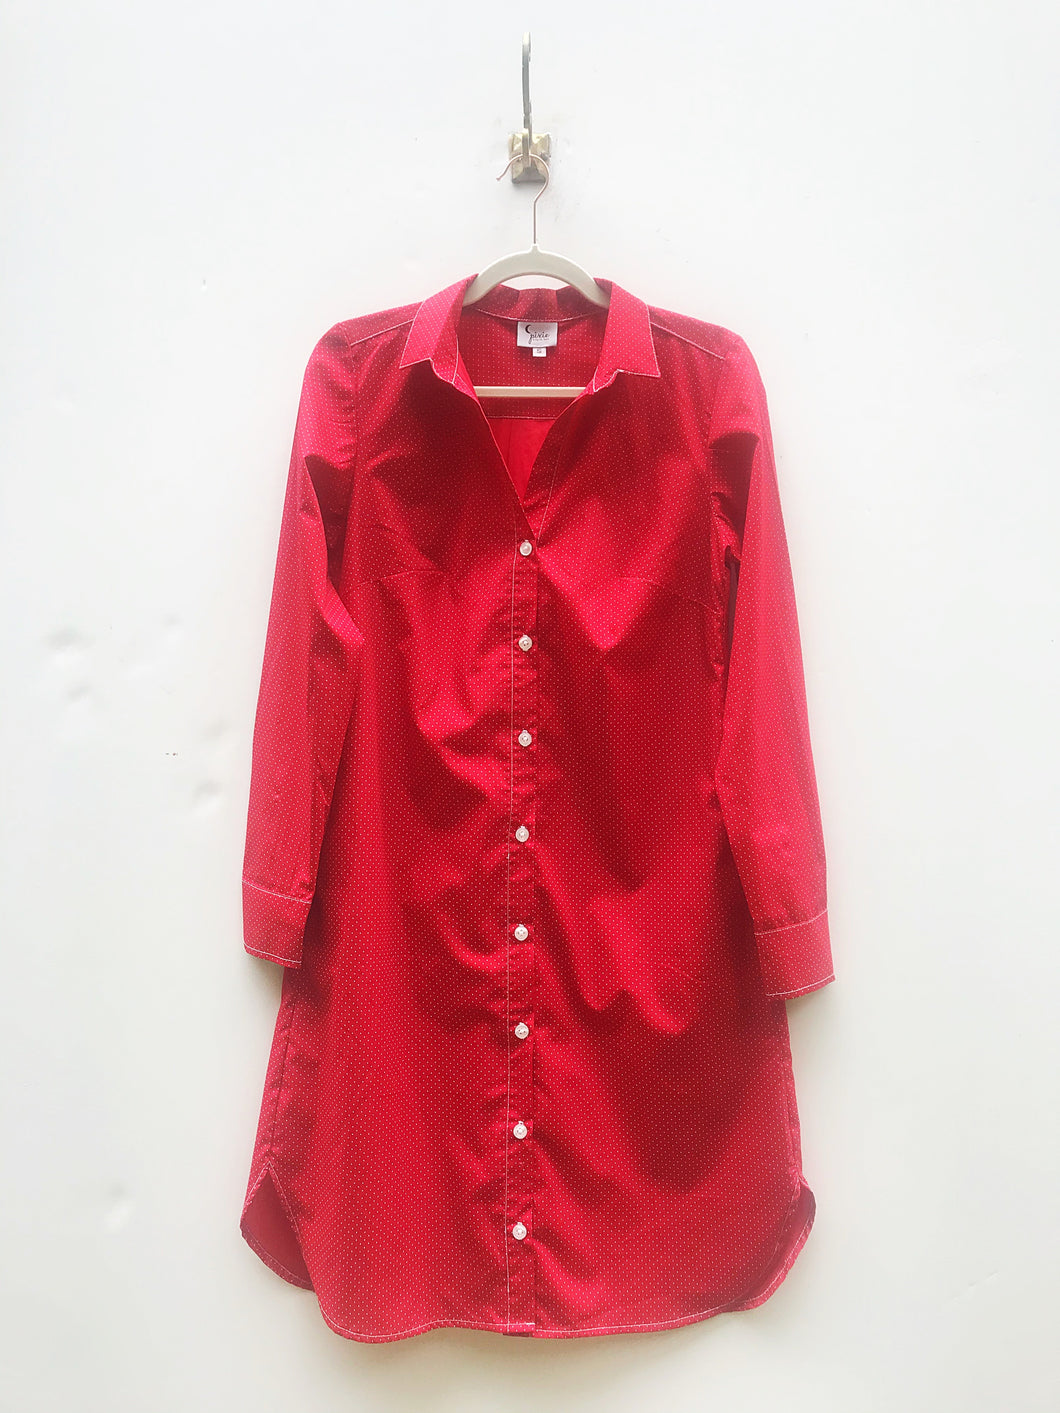 Sea Island Shirtdress in Game Day (Red with Small White Dots)